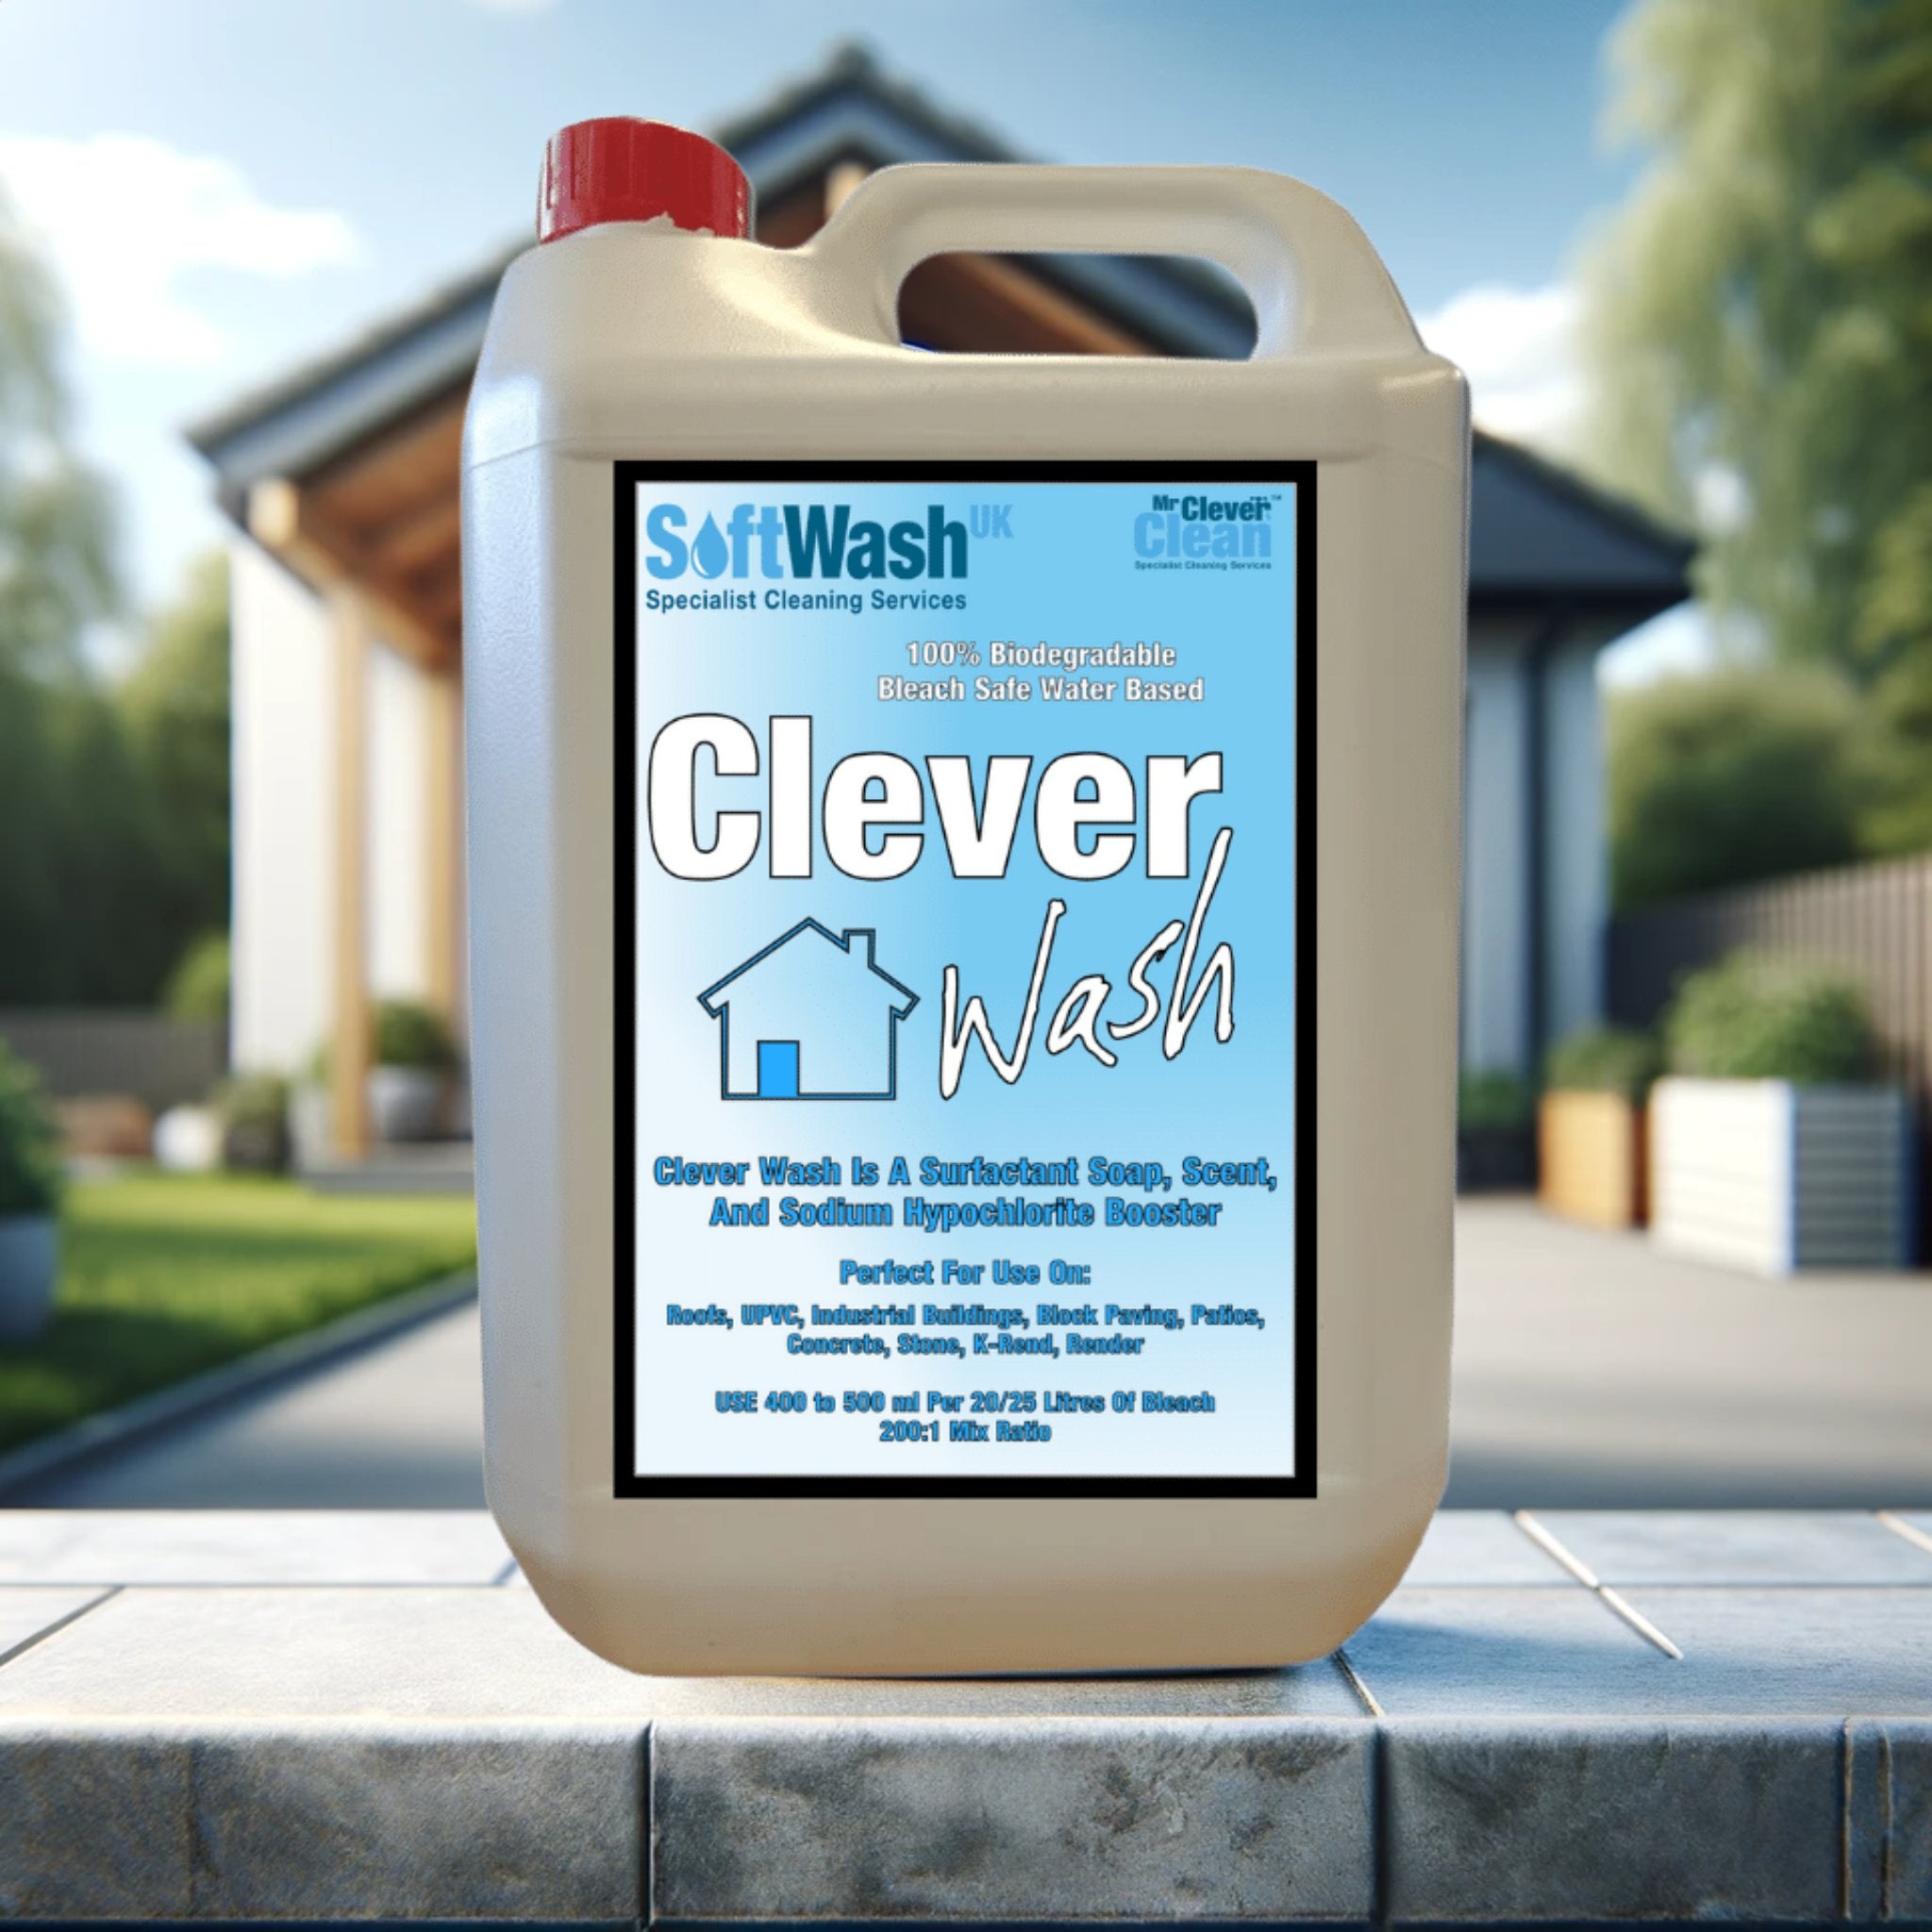 High-efficiency Clever Wash Soft Washing Surfactant in branded container, ideal for effective and eco-friendly exterior cleaning